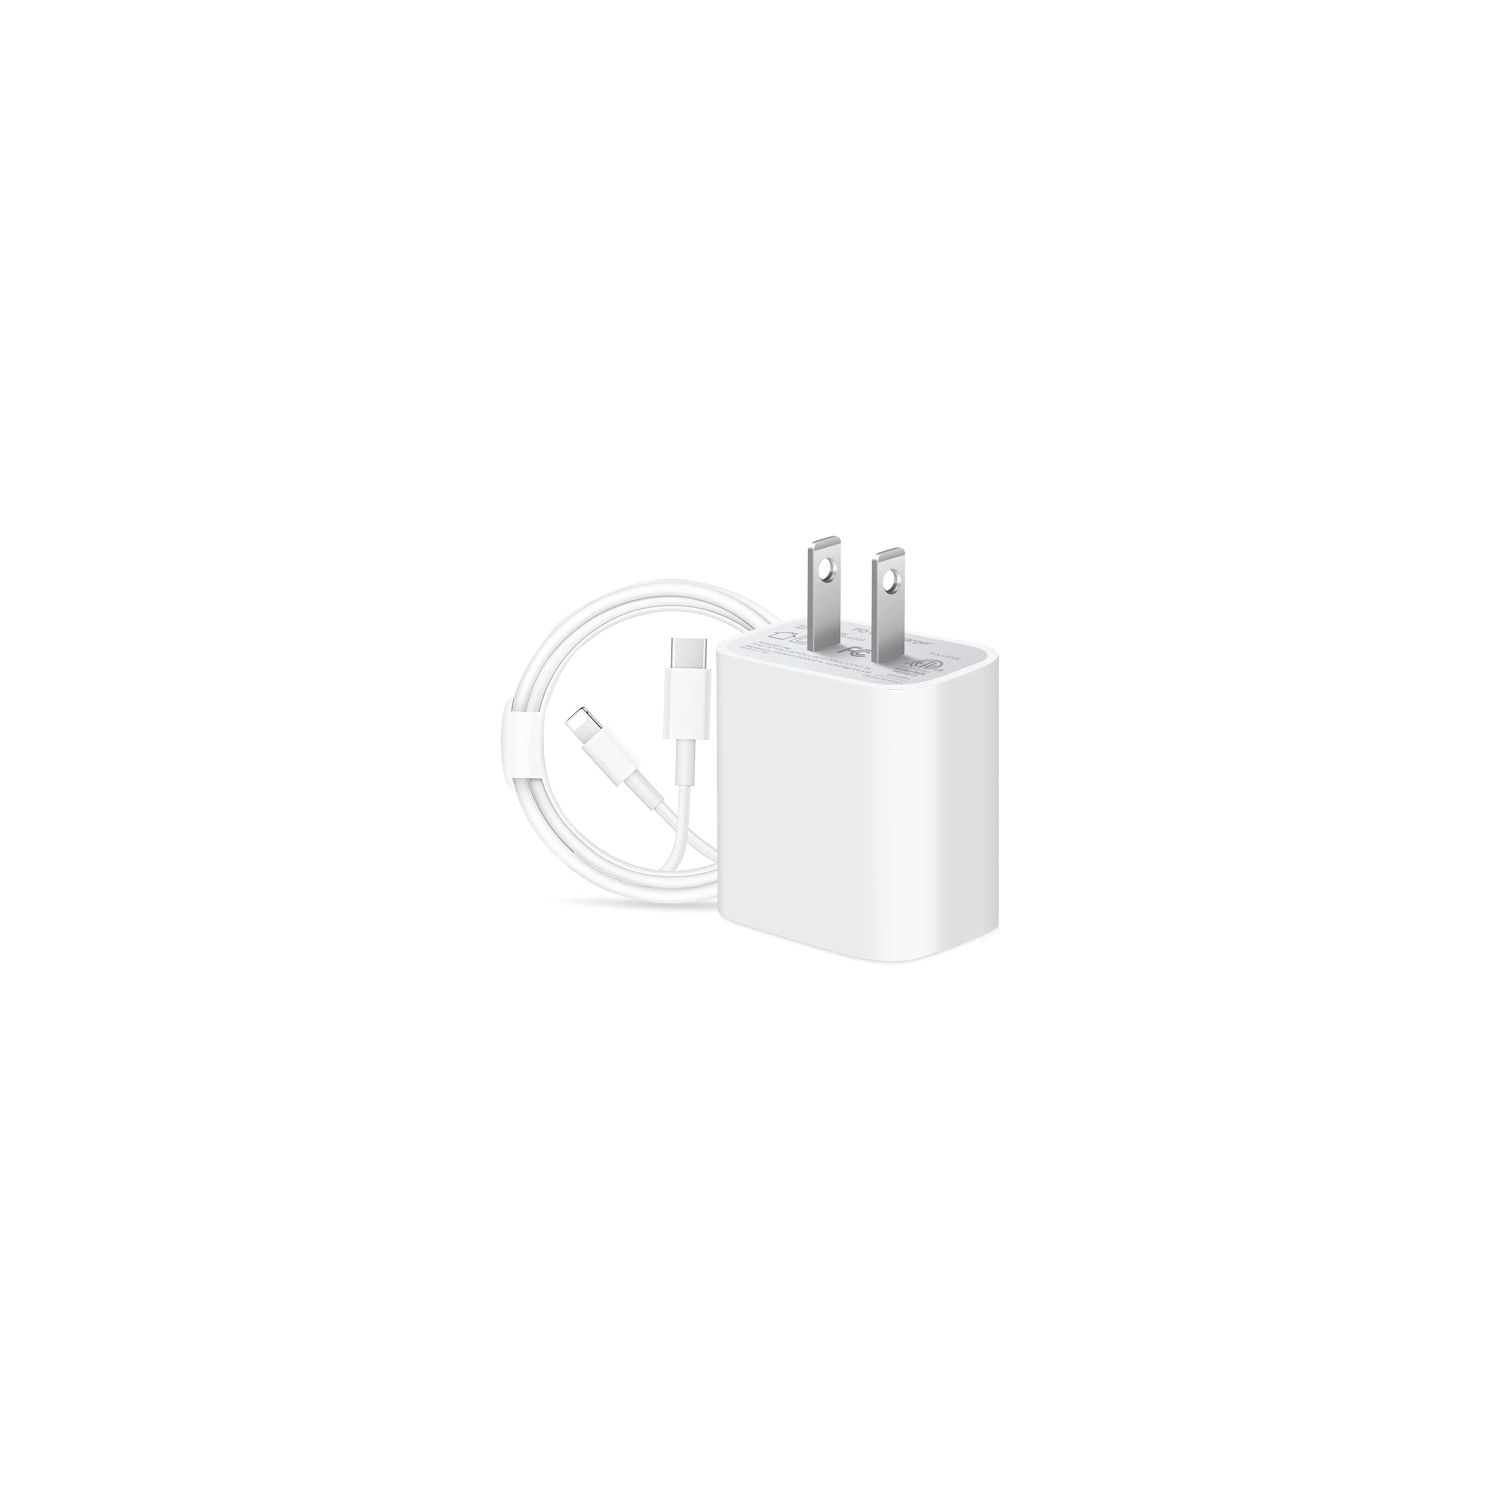 iPhone Fast Charger 20W | Wall Block USB Type C Adapter Cube Compatible with Apple iPhone 15, 14, 13, 12, 11 Pro Max, XR, XS, iPad with Charging Cable Cord